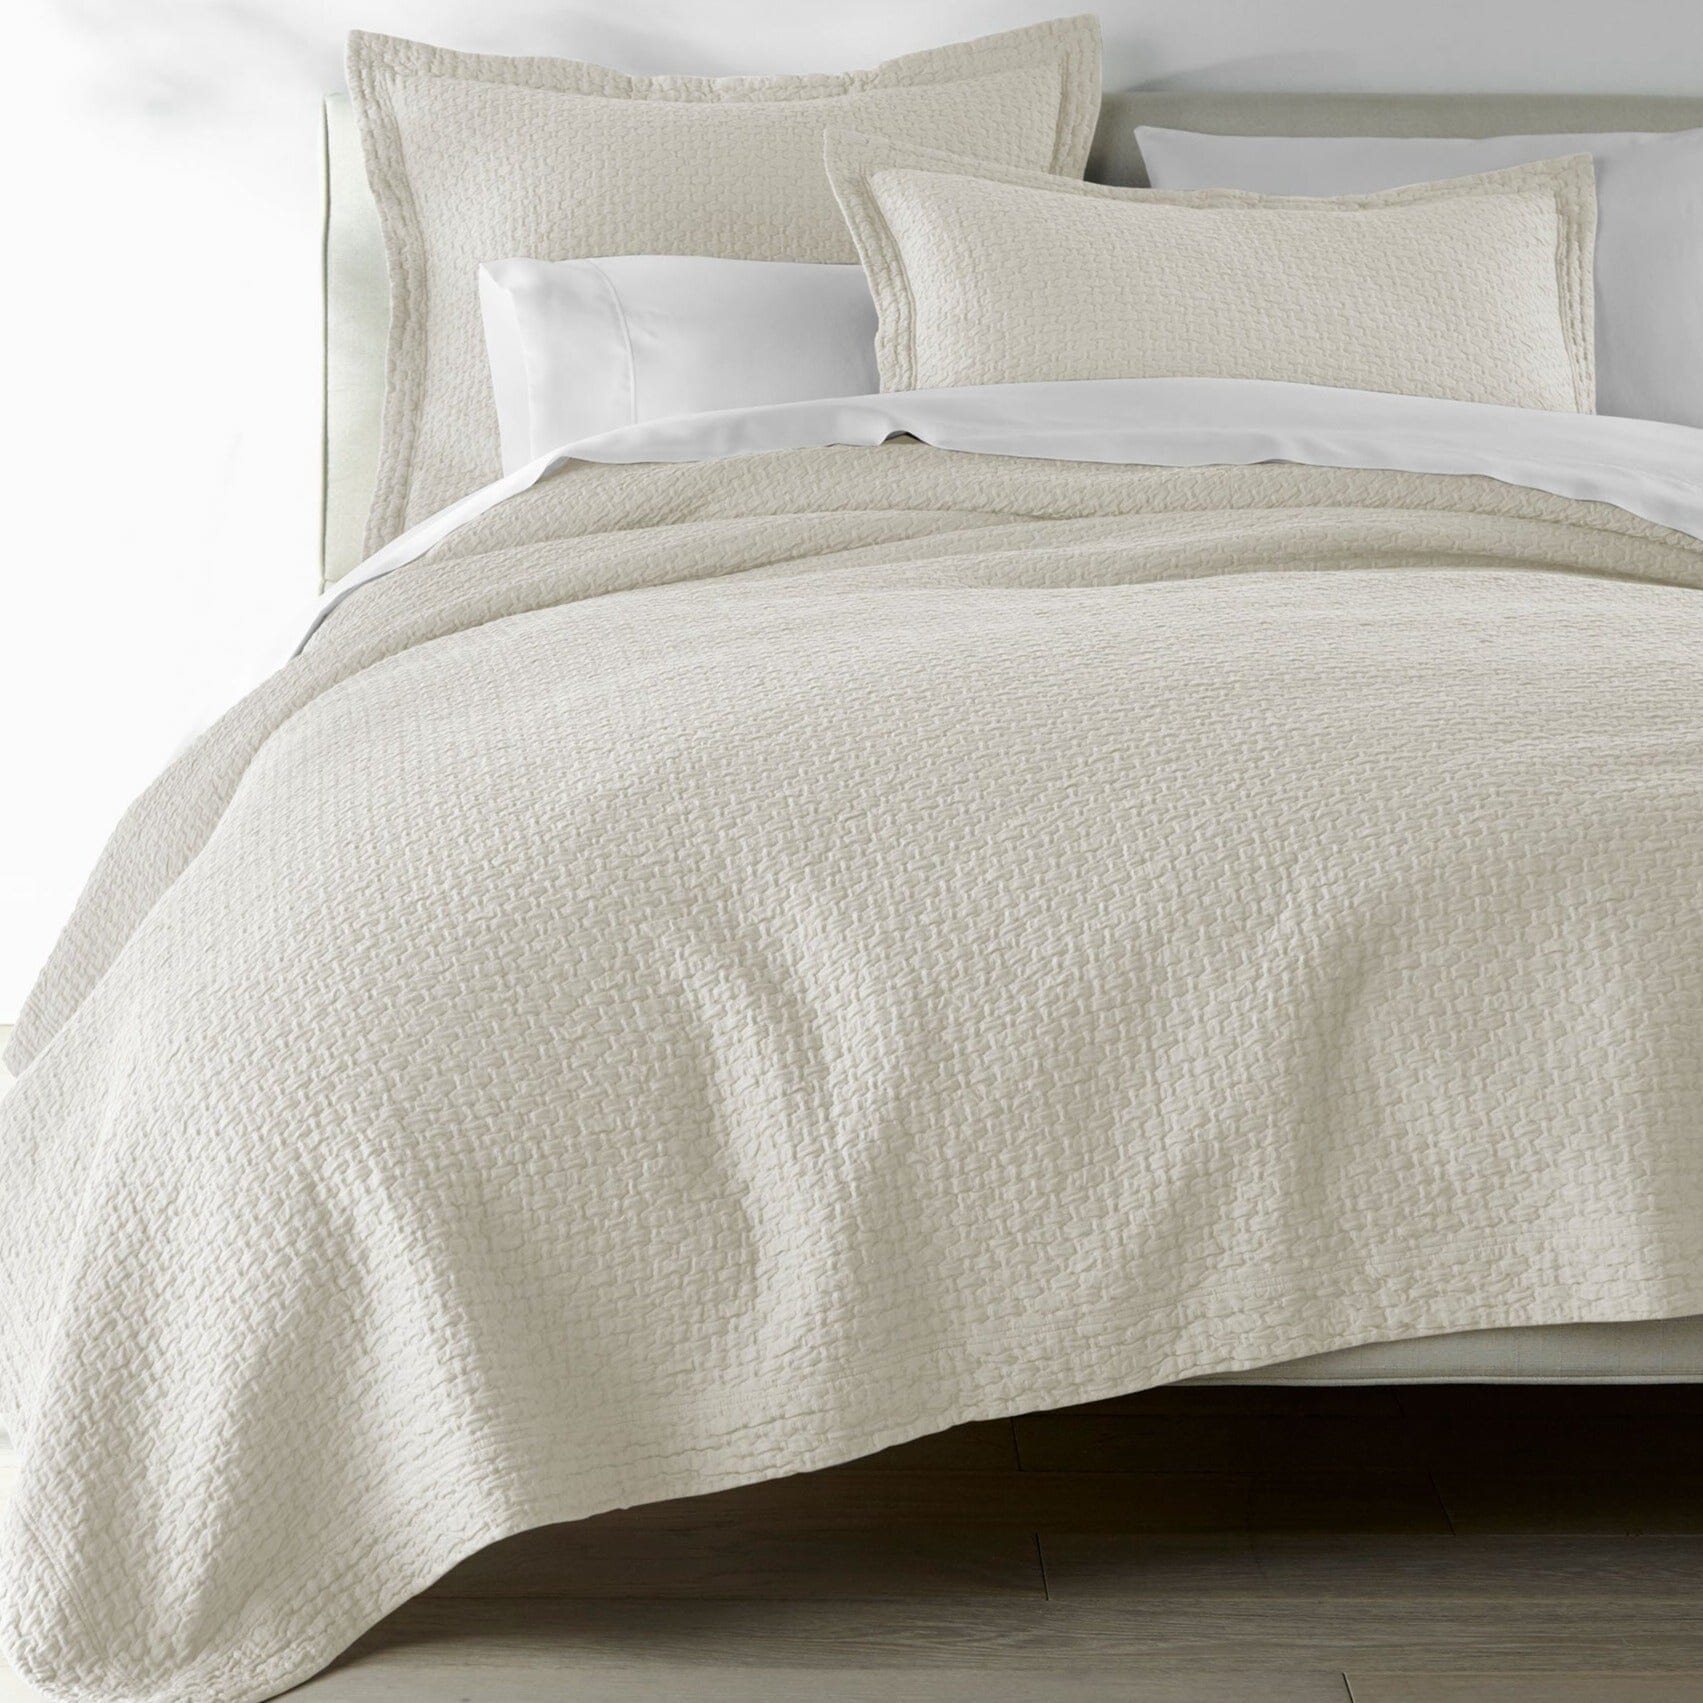 Juliet Pearl Coverlets | Peacock Alley Matelasse Shown on Bed with Shams